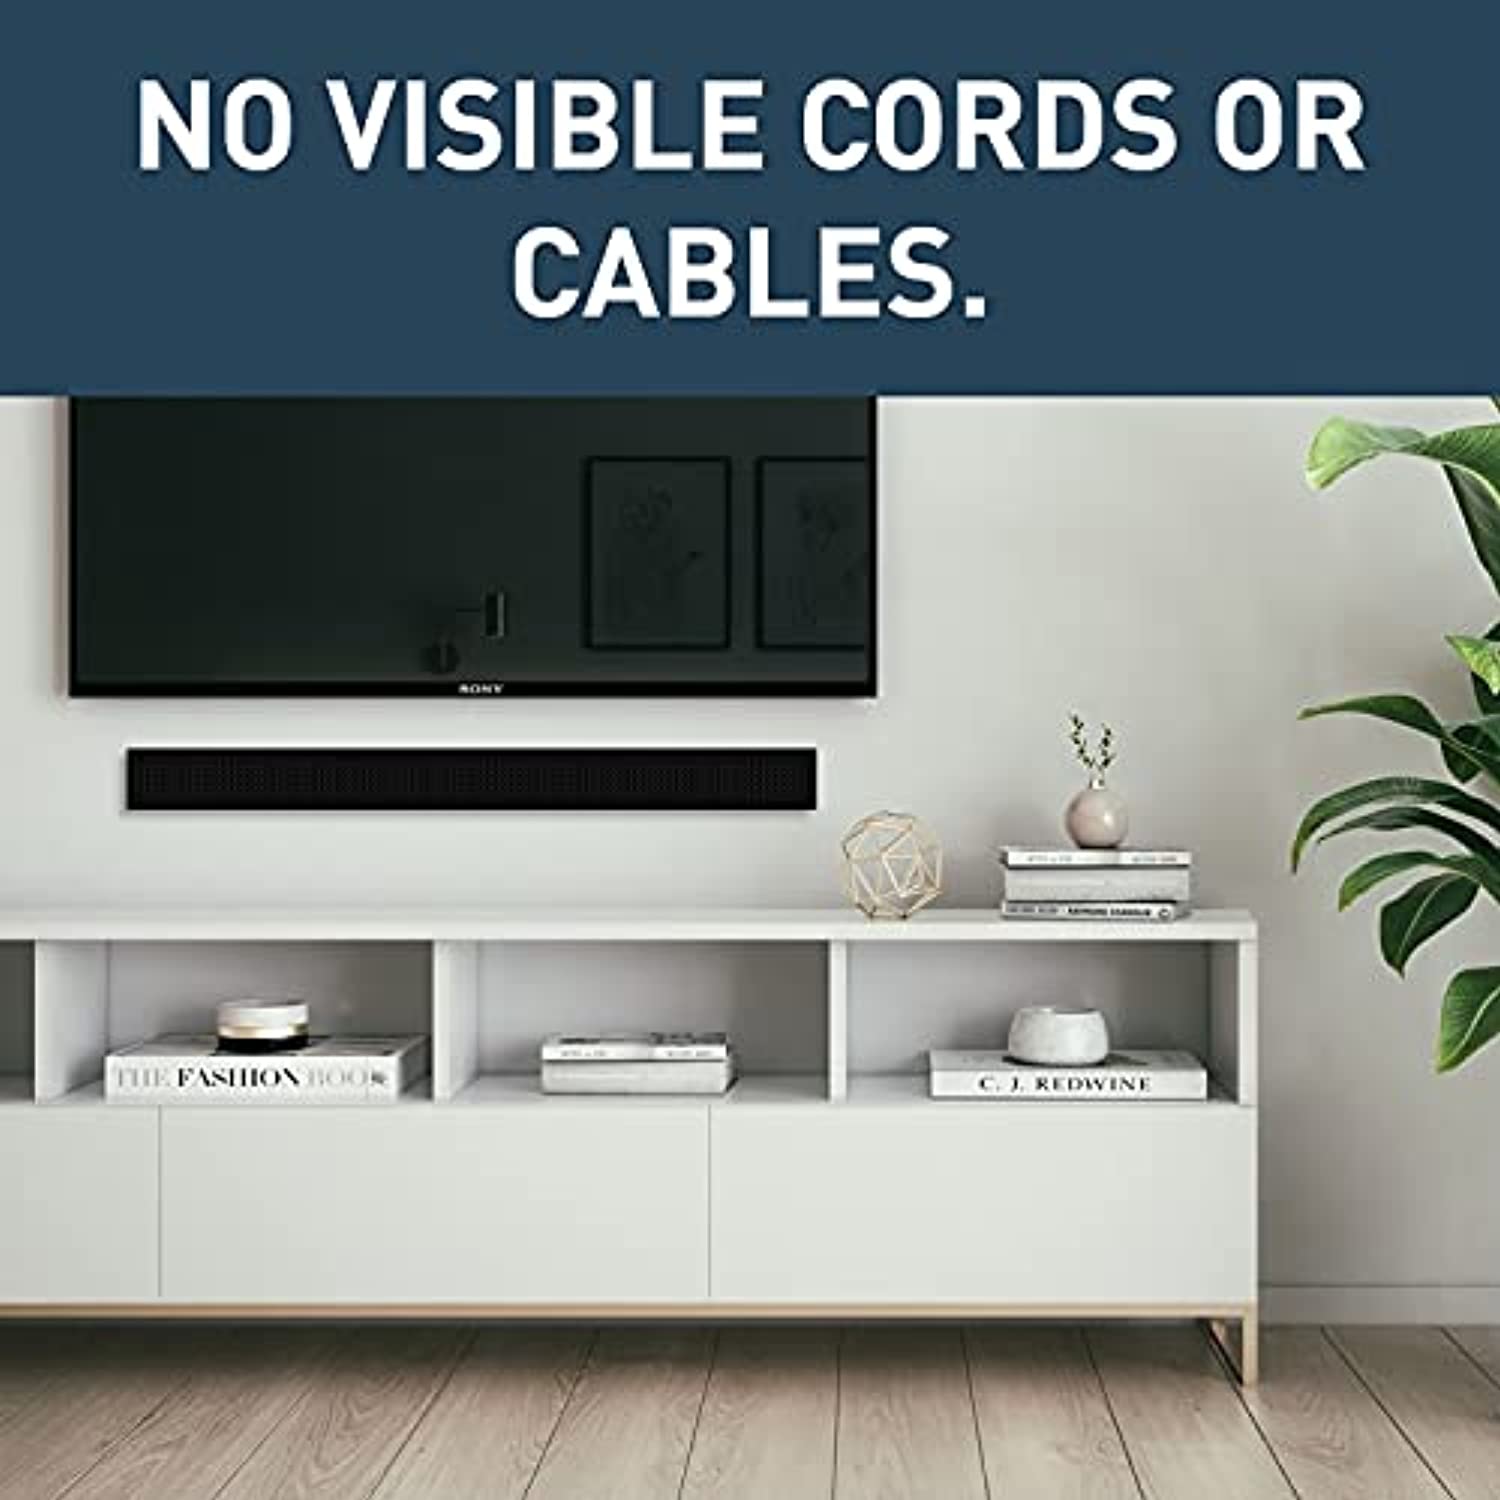 Wiremold Cord Management Kit in Wall Flat Screen TV Wire and Cable Hider